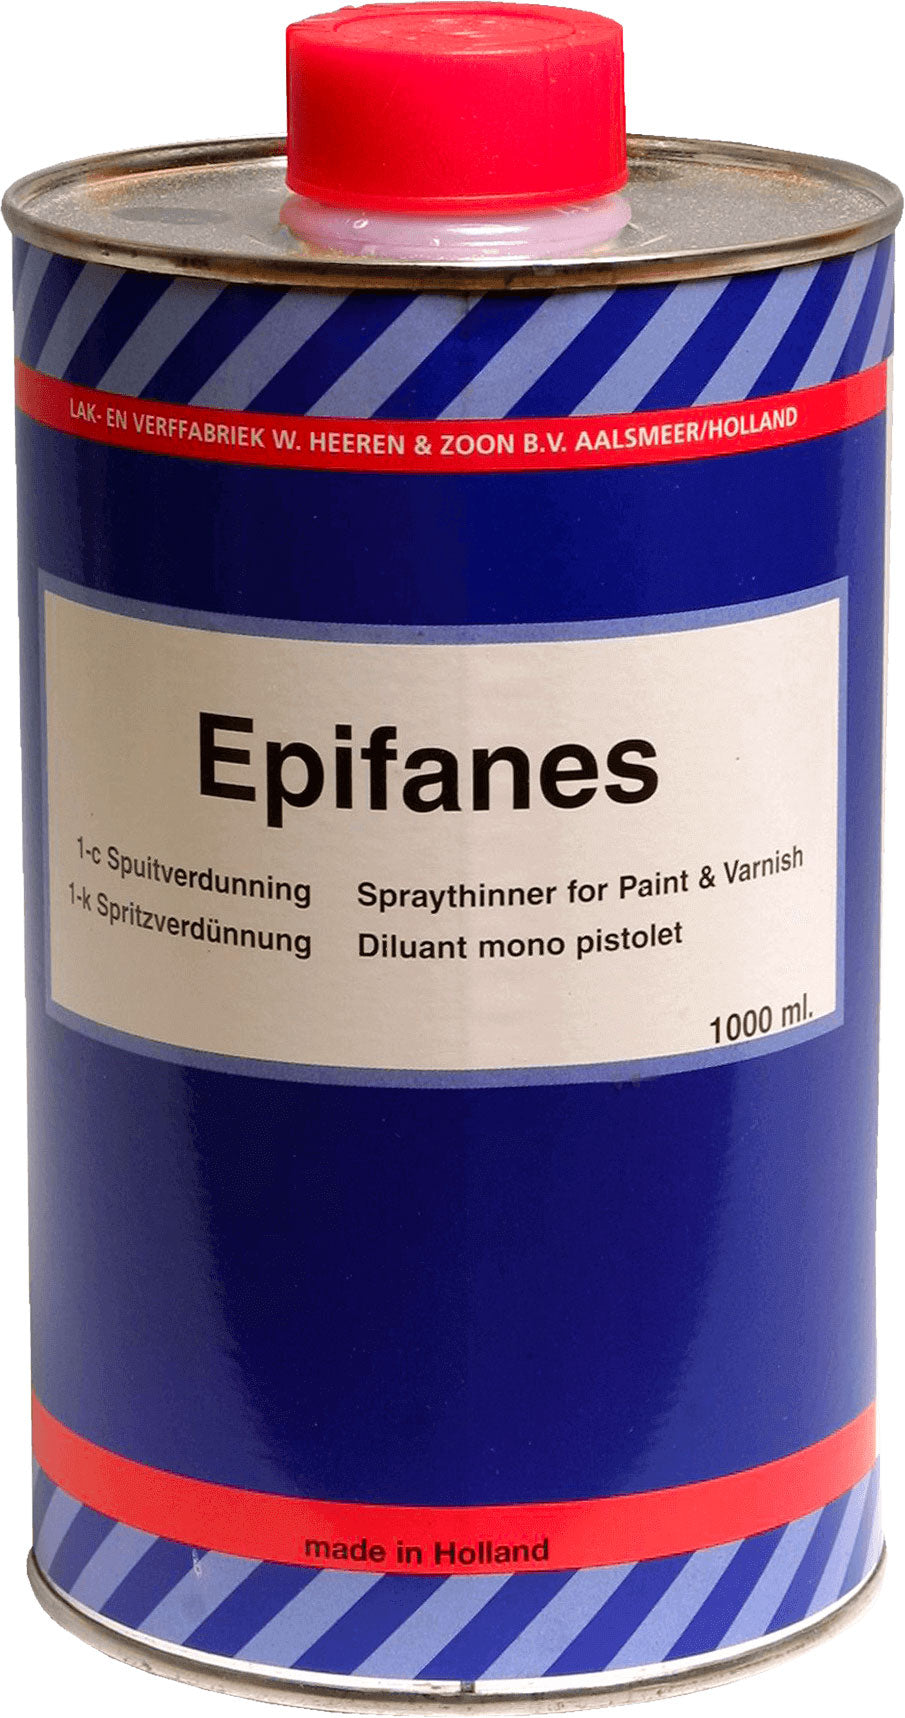 Epifanes sprayer dilutes 1 ltr.